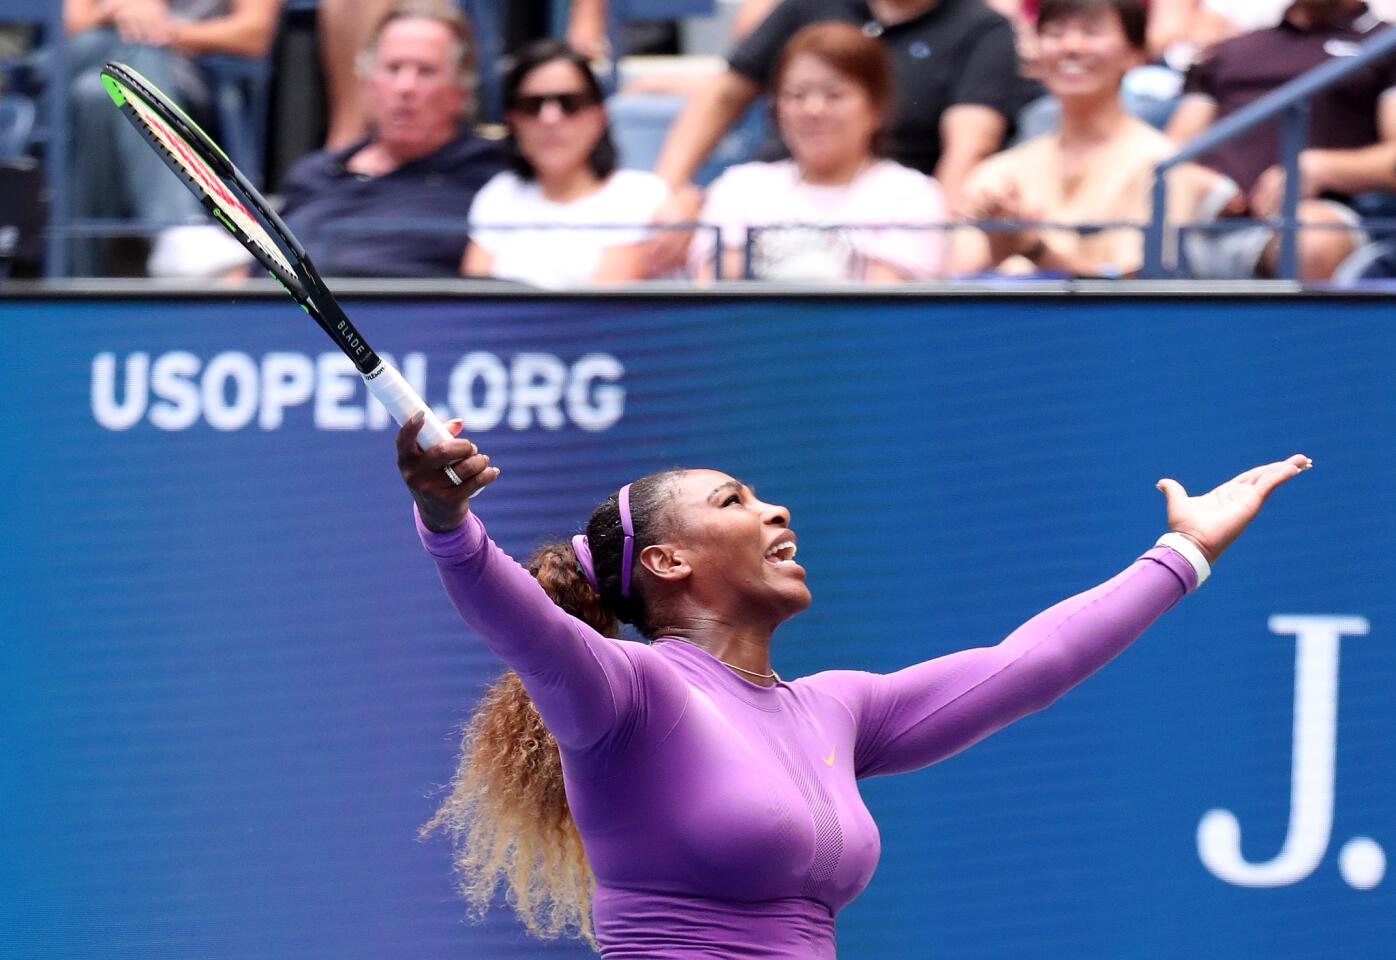 Serena Williams reacts during her Women's Singles third round match against Karolina Muchova in the 2019 U.S. Open in Arthur Ashe Stadium inside the Billie Jean King National Tennis Center on Aug. 30, 2019, in Queens. Williams defeated Muchova advancing to the fourth round.